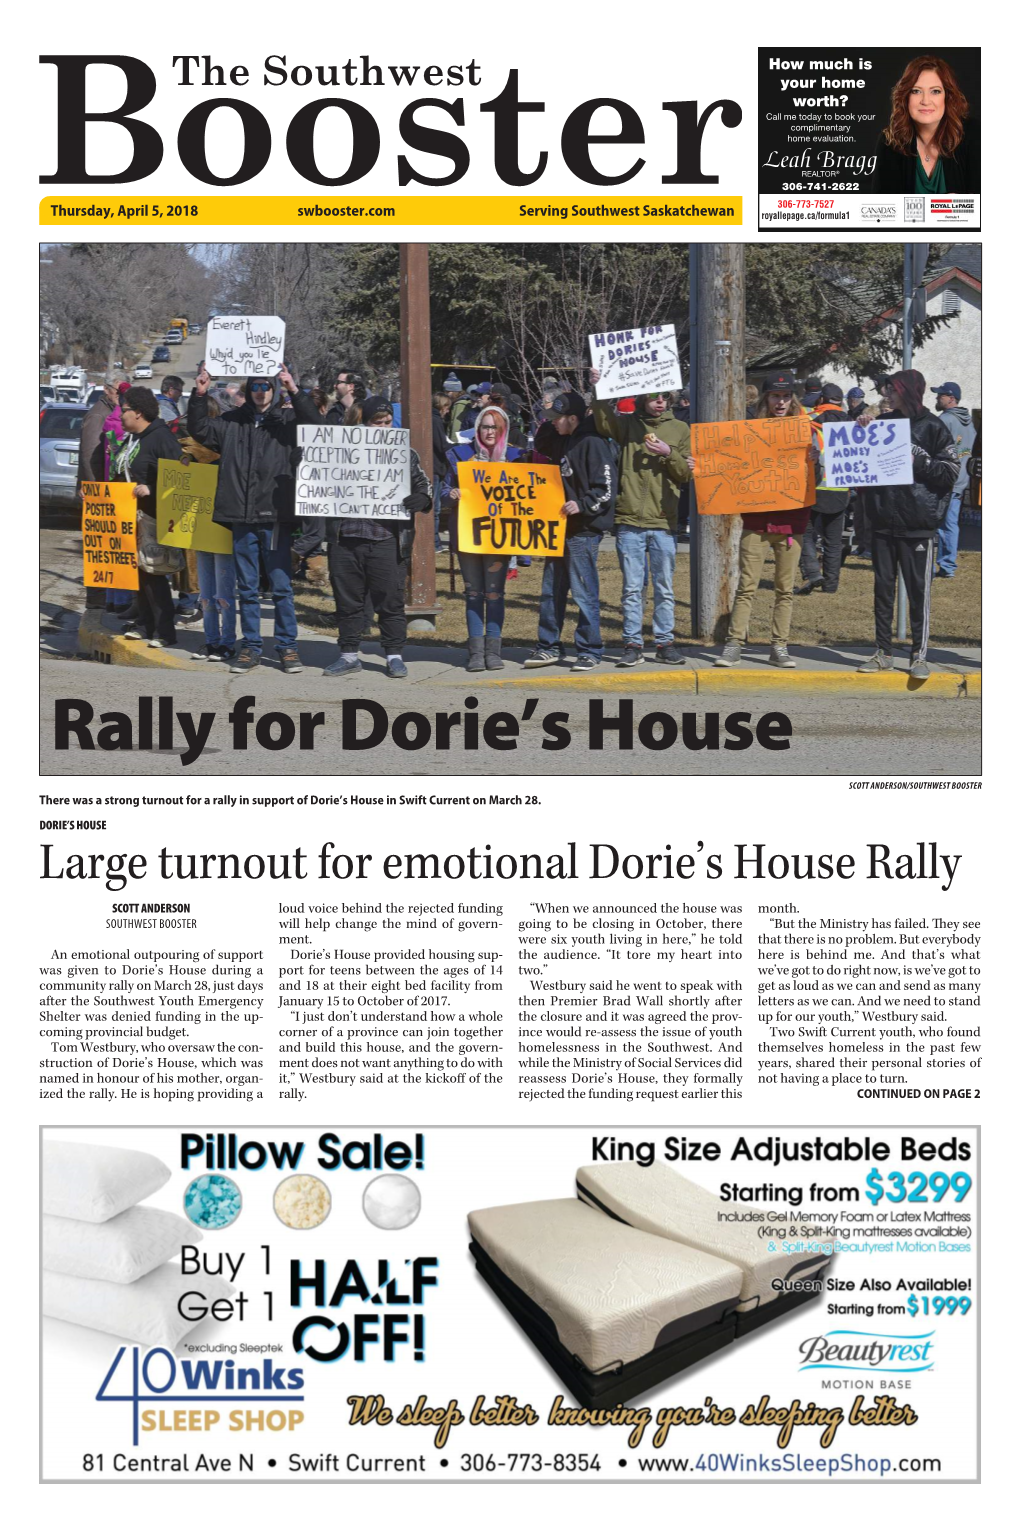 Rally for Dorie's House